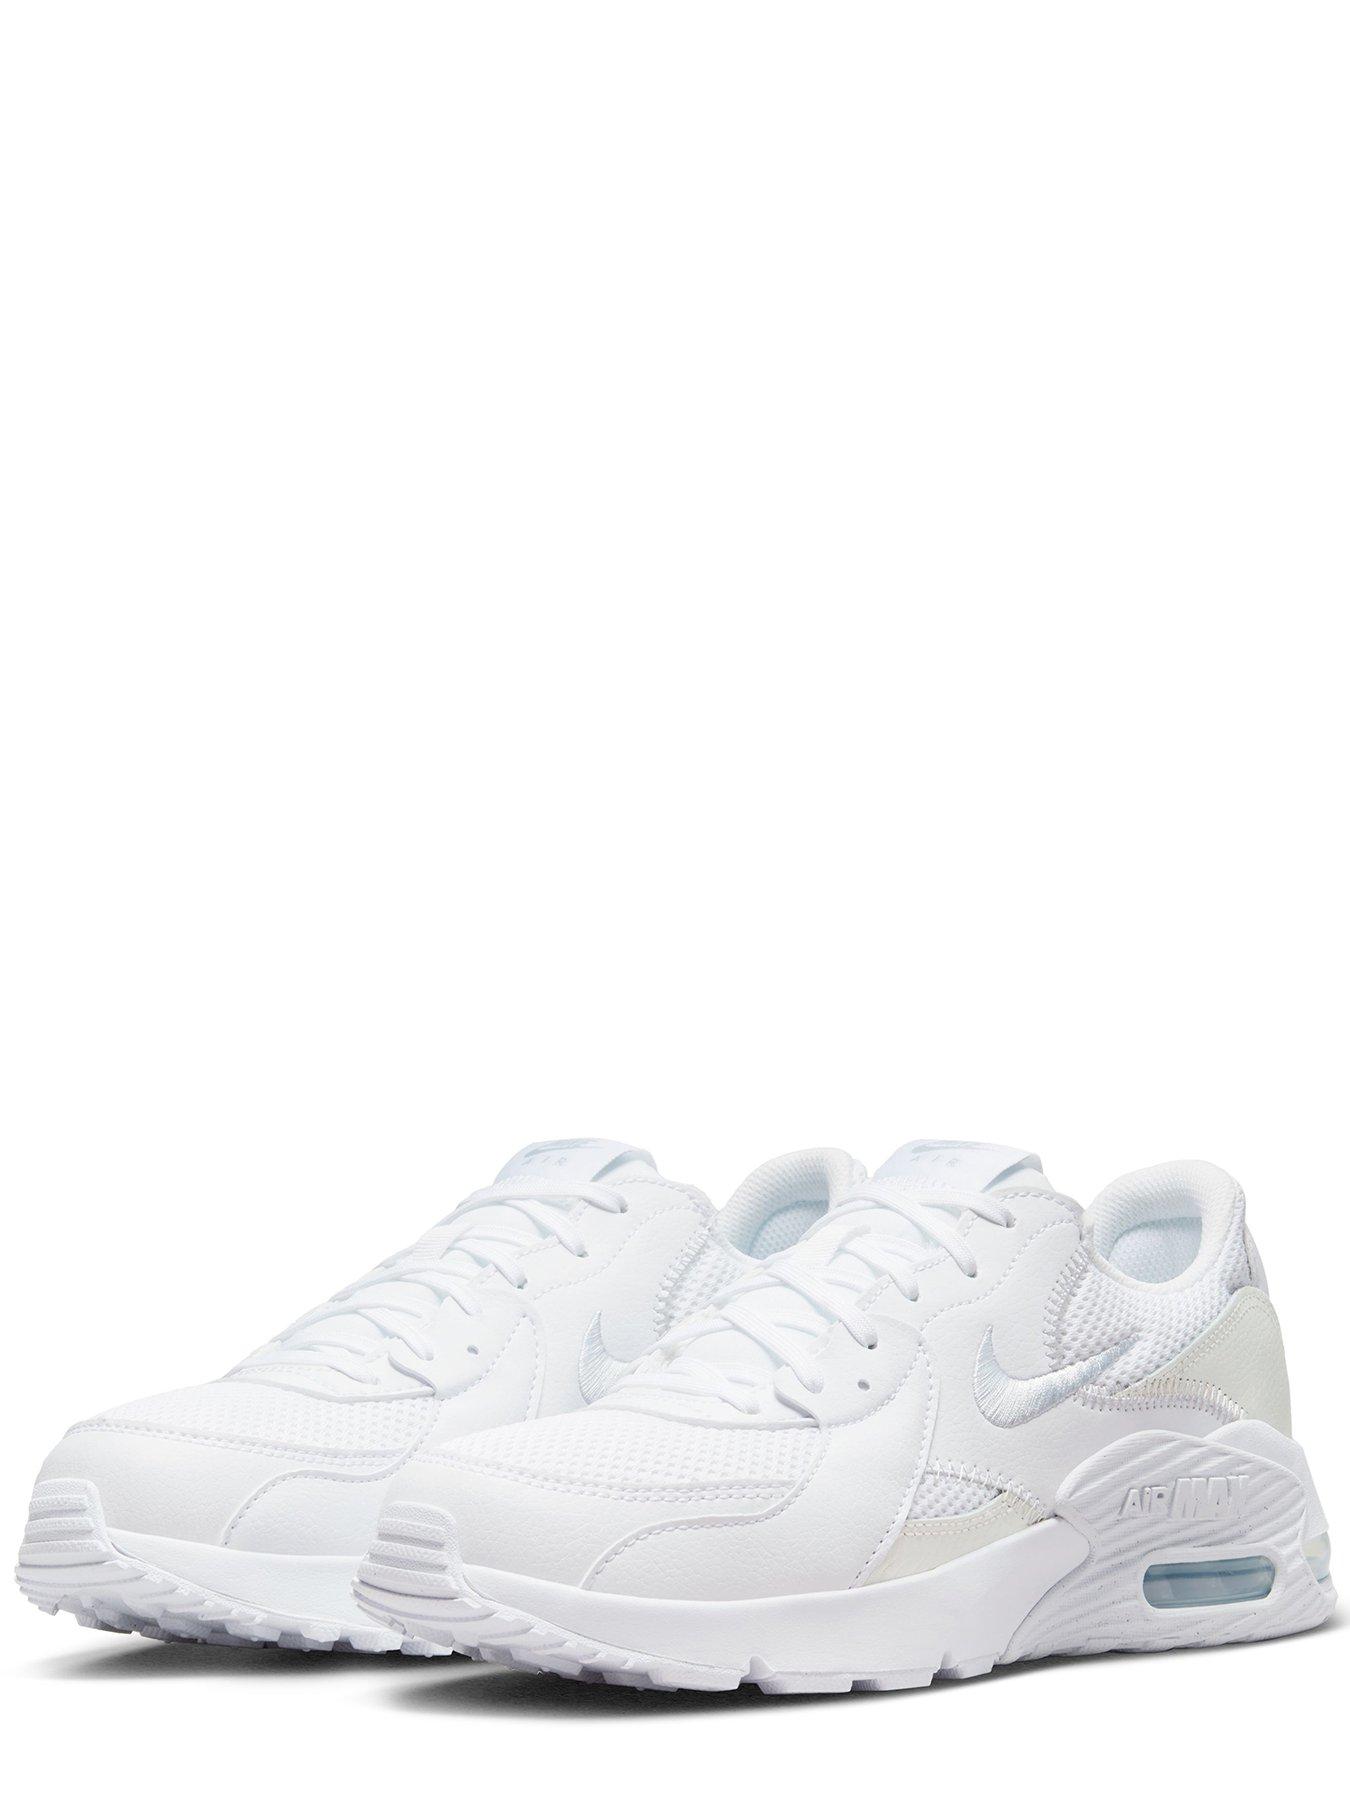 Nike Air Max Excee Trainers - White/Silver | littlewoods.com